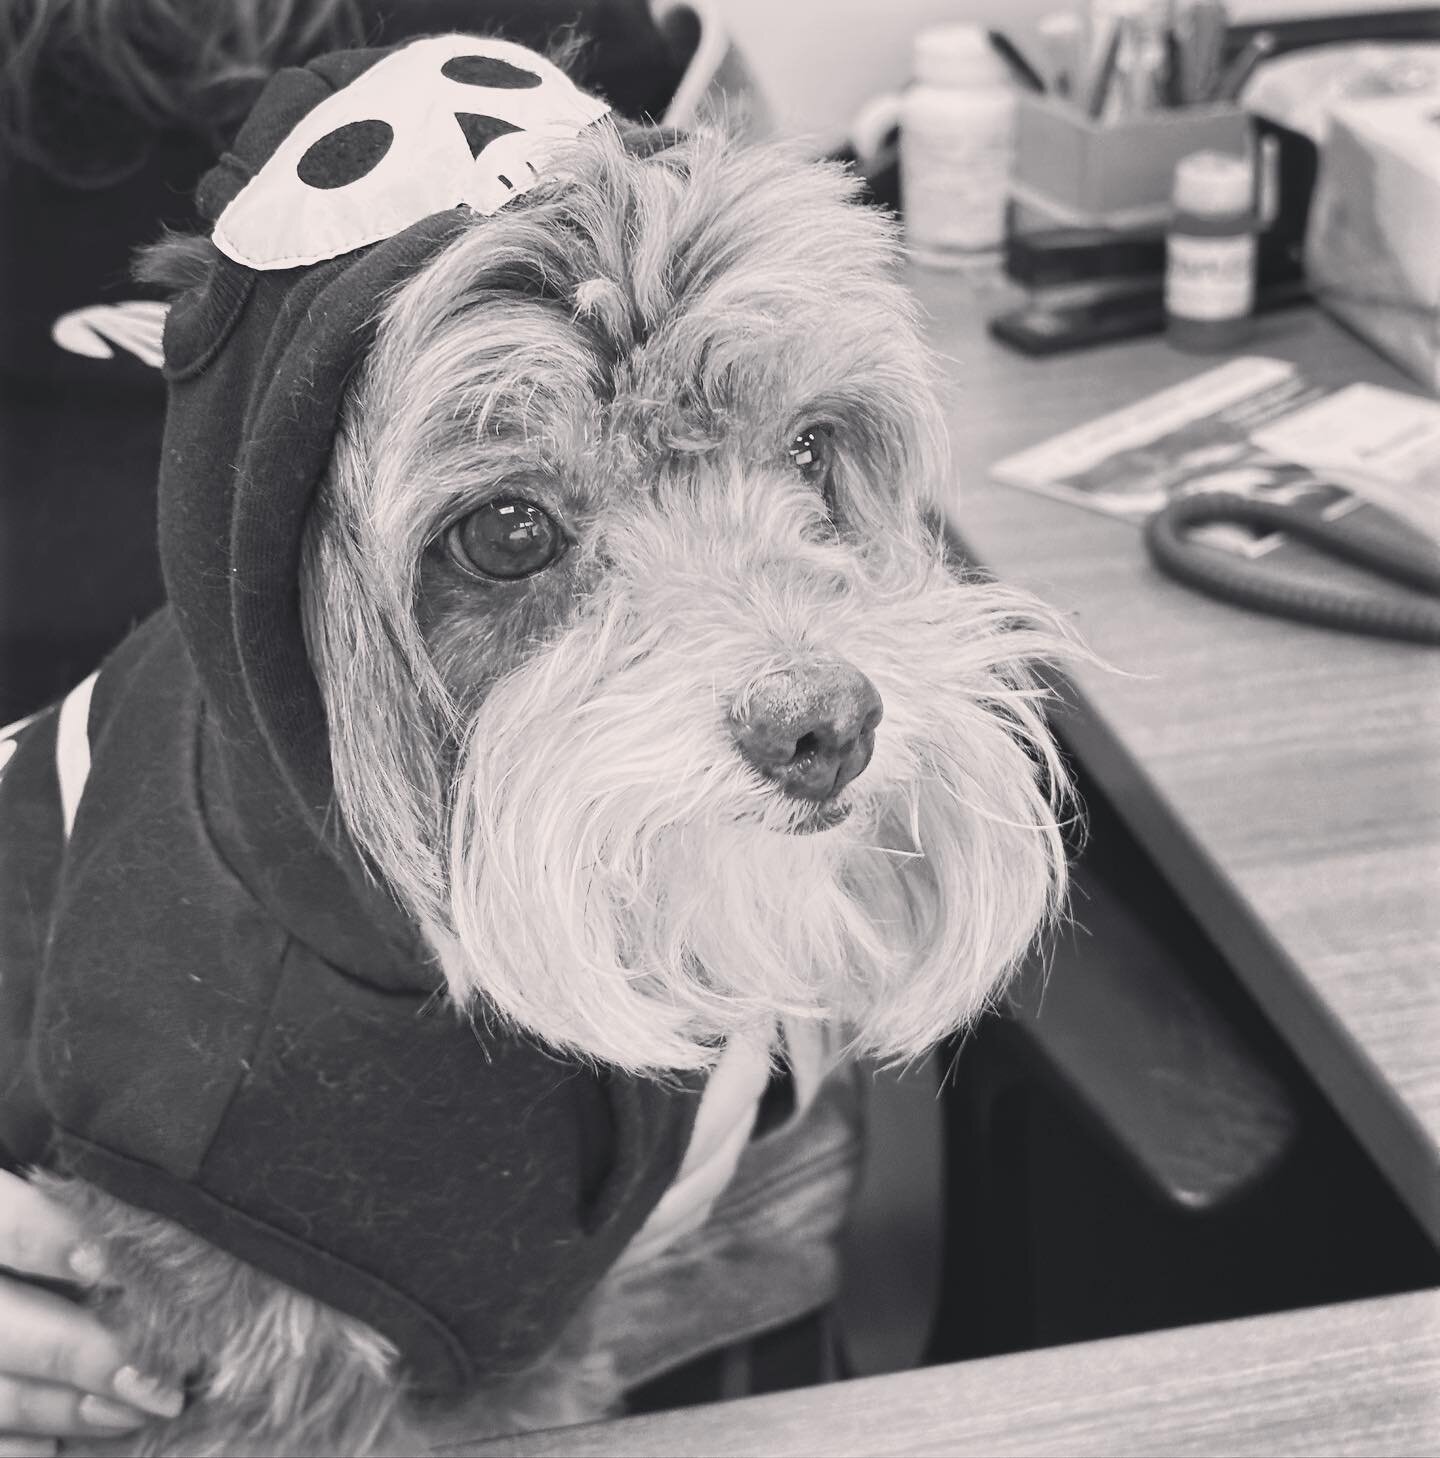 It&rsquo;s not just a phase mom!🖤💀 

Still can&rsquo;t believe he wore the hood for more than 2 seconds #growth #halloweencostumesinapril 

#doggycostume #dogcostume #halloweendog #skeletondog #emodog #emoboi